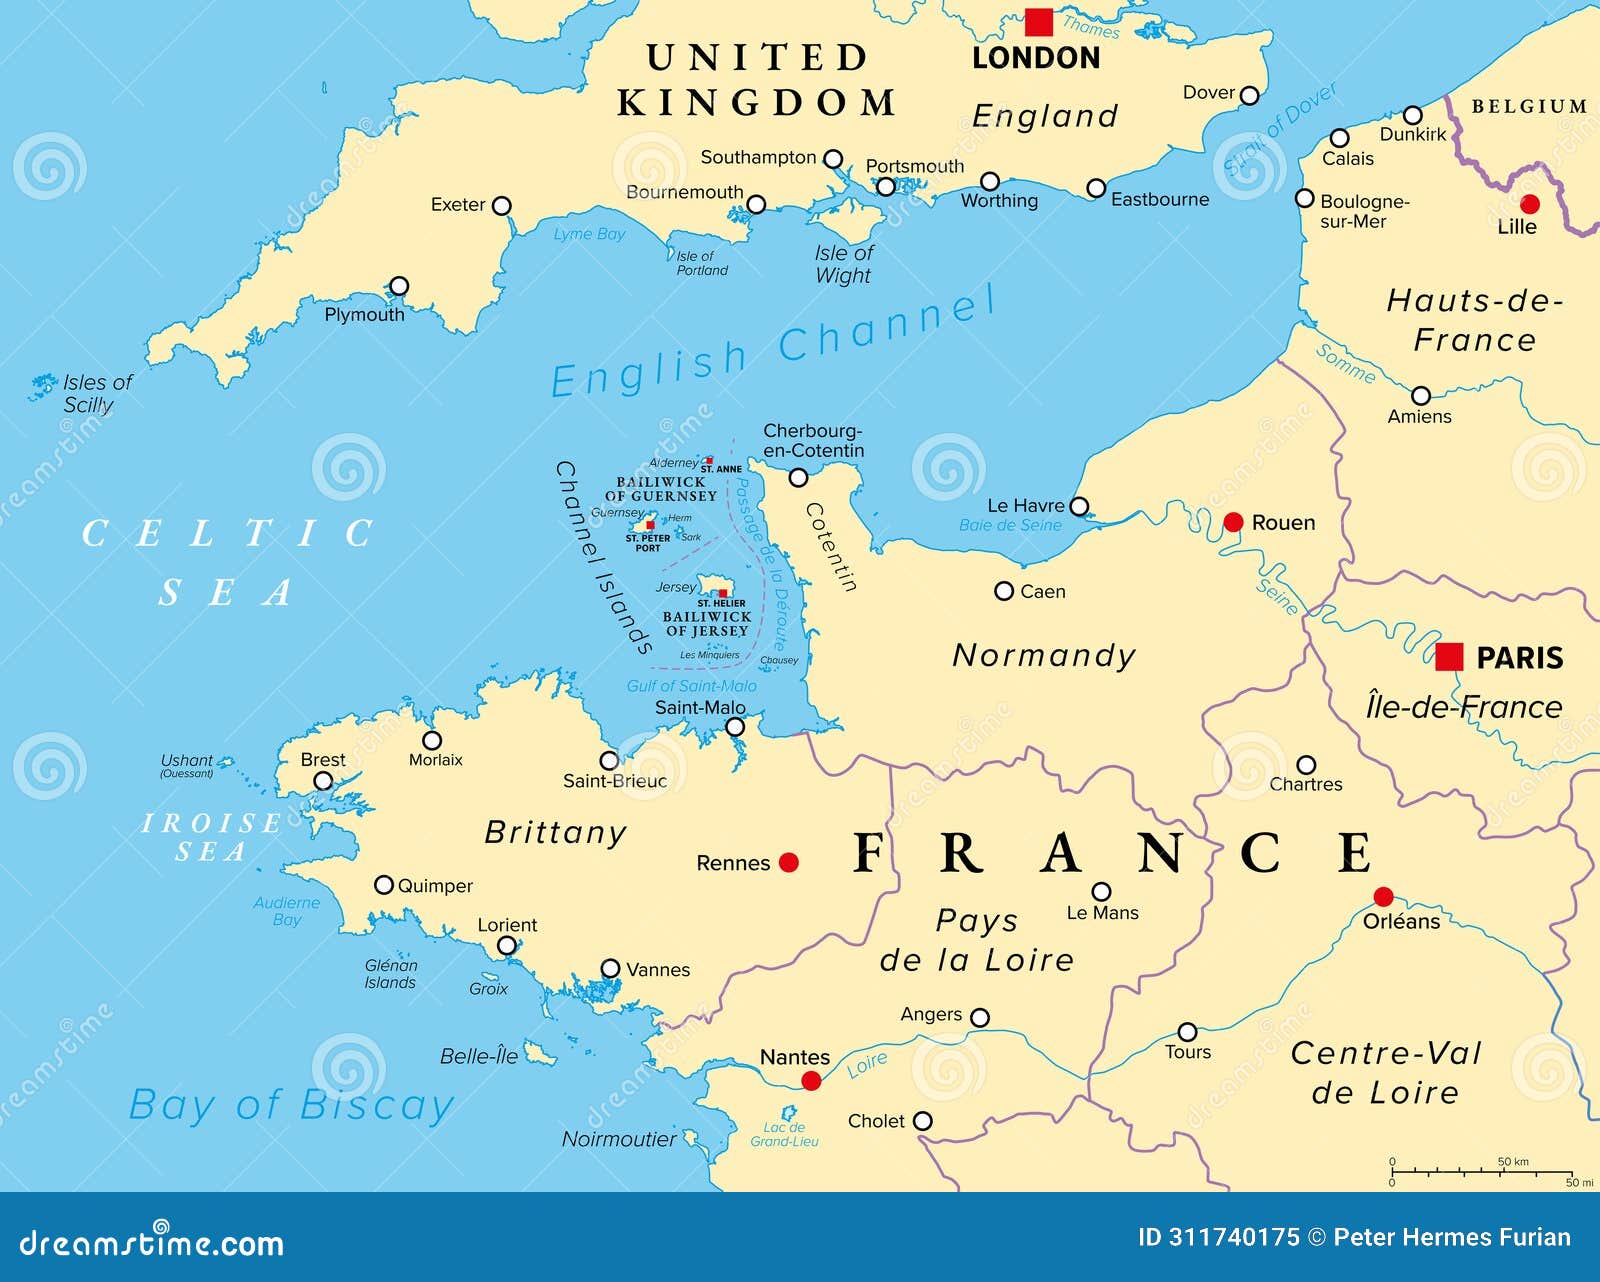 northern france coast along english channel and bay of biscay, political map